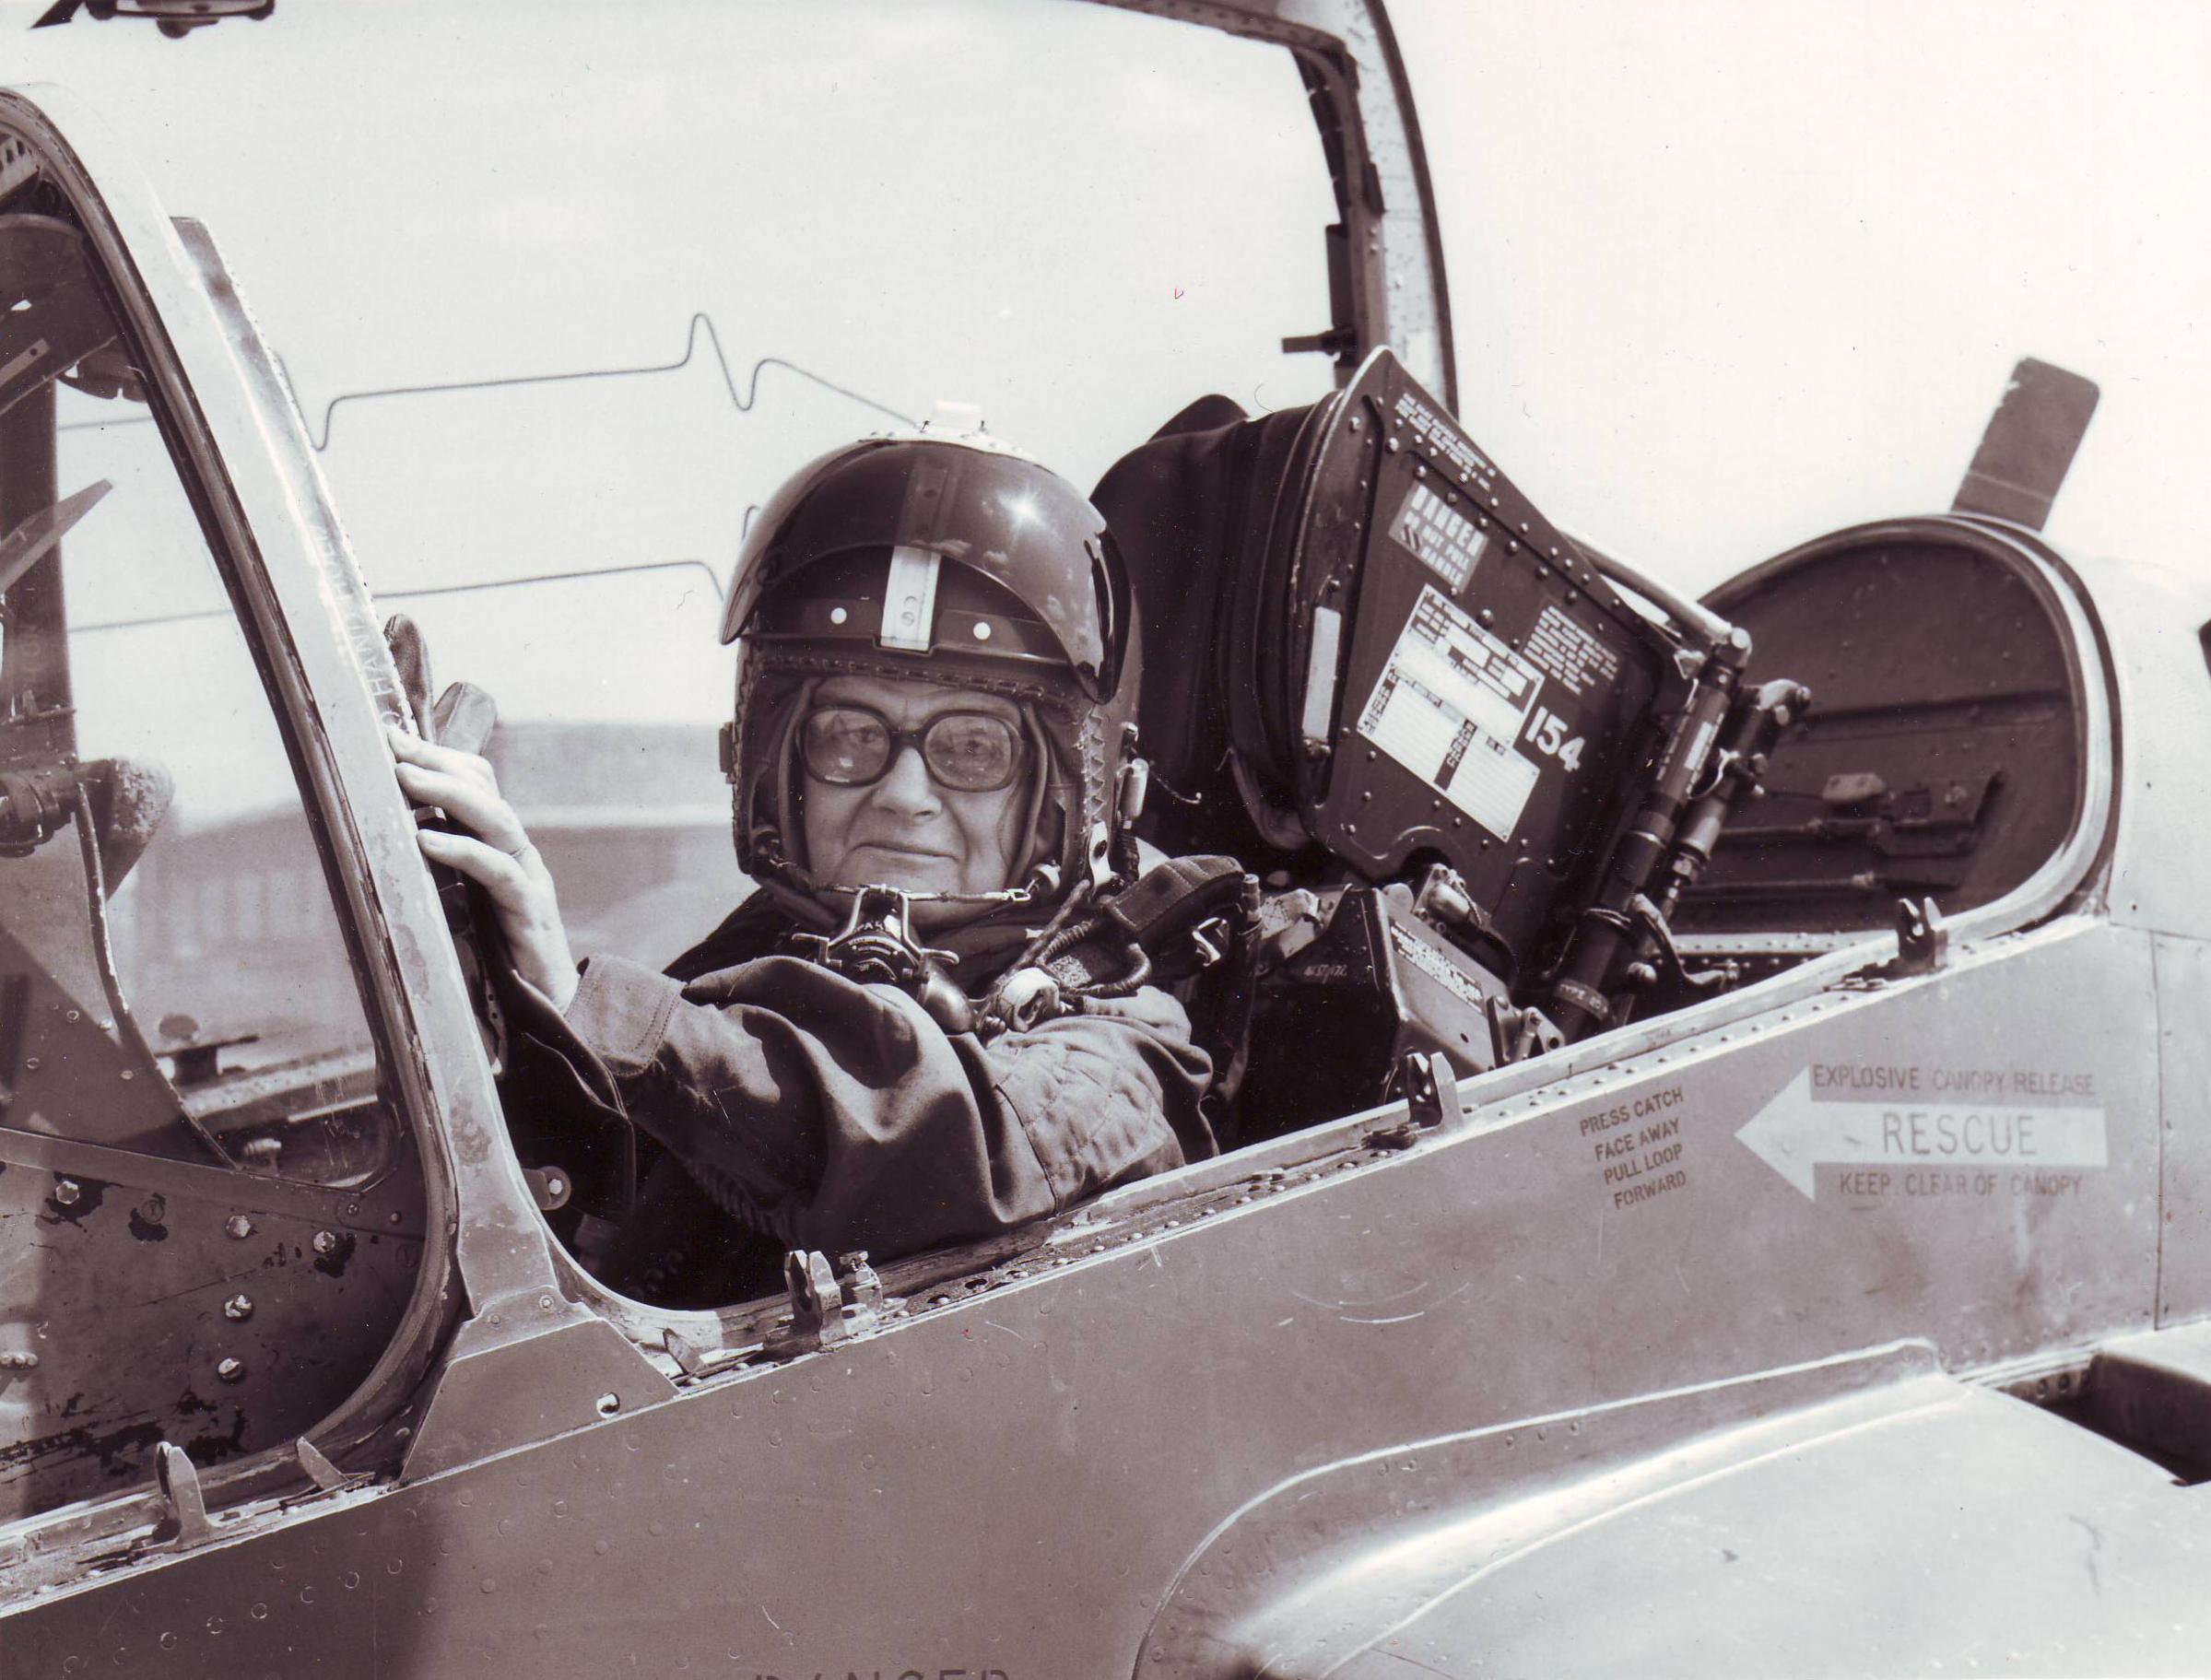 Clare in a jet, likely British RAF, during her time as Daily Telegraph defense correspondent, sometime between 1976 and 1981.